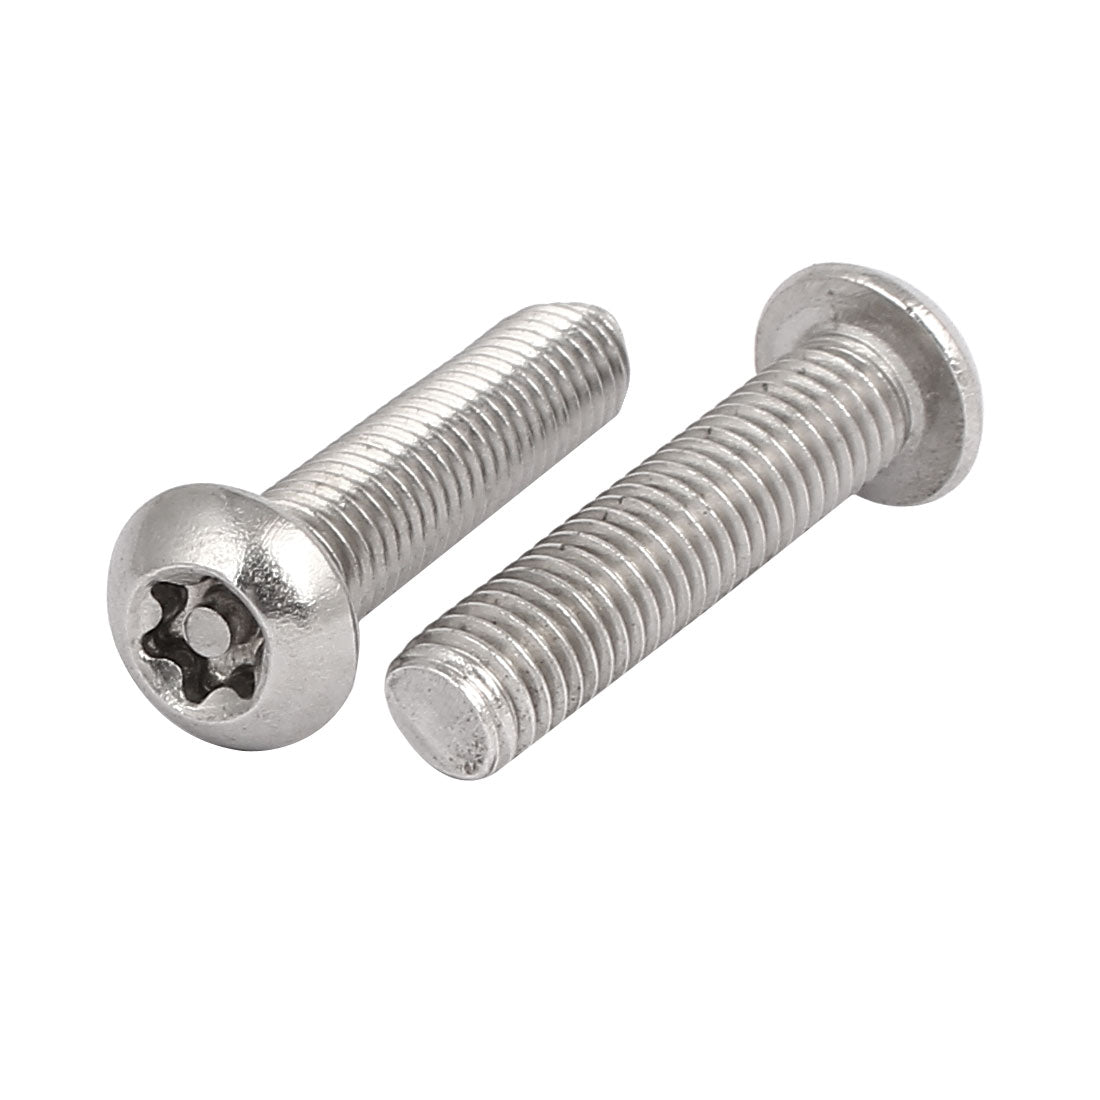 uxcell Uxcell M8x35mm 304 Stainless Steel Button Head Torx Security Machine Screws 2pcs